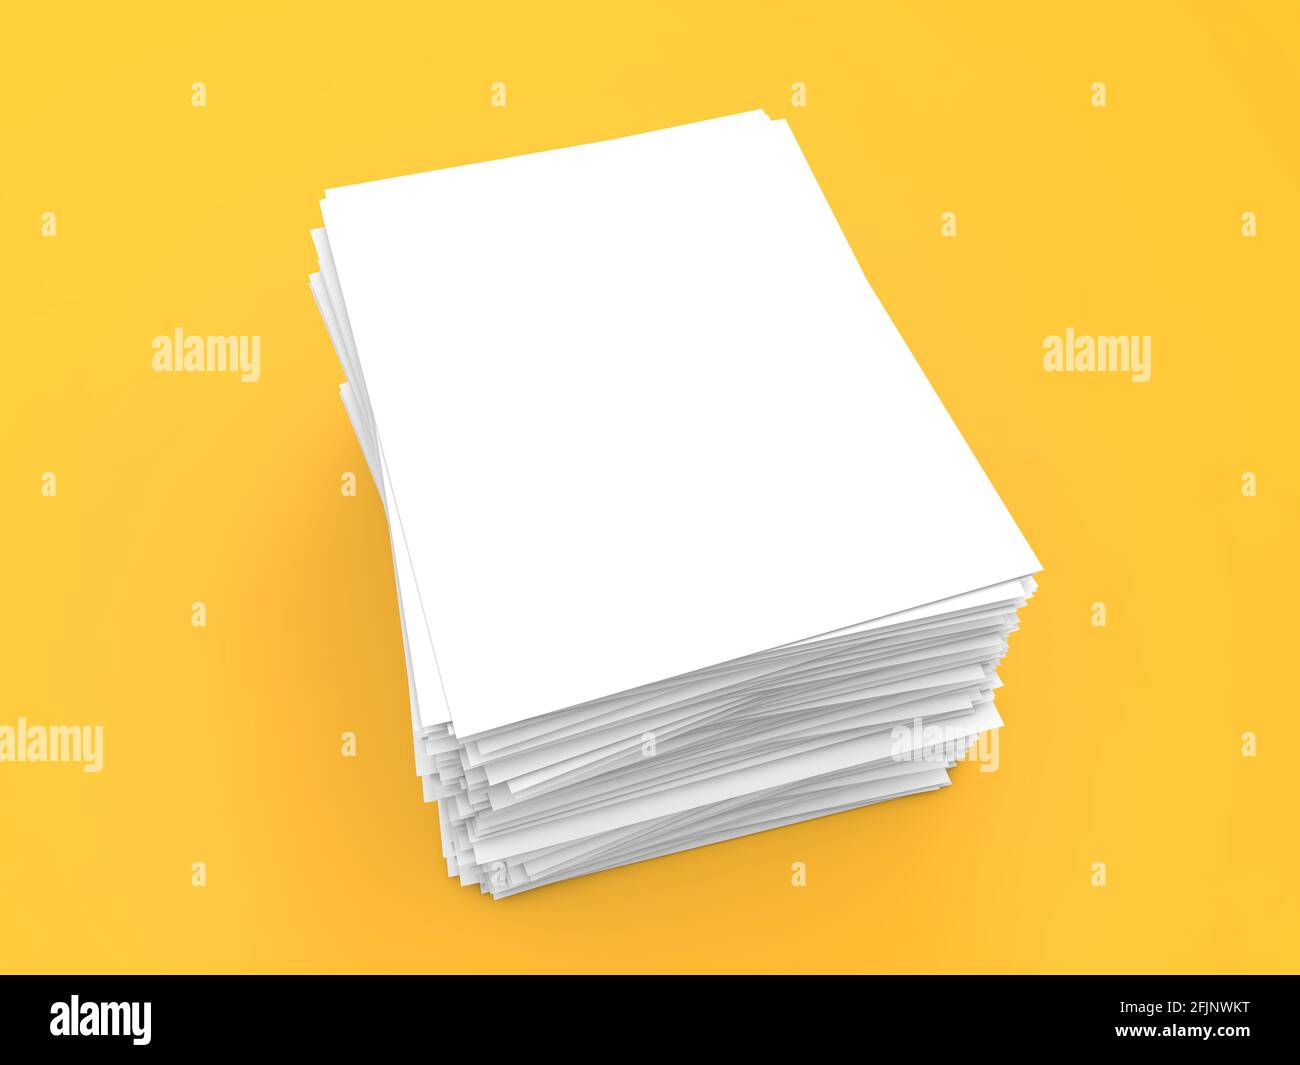 Stack of white sheets of A4 office paper on a yellow background. 3d render illustration. Stock Photo